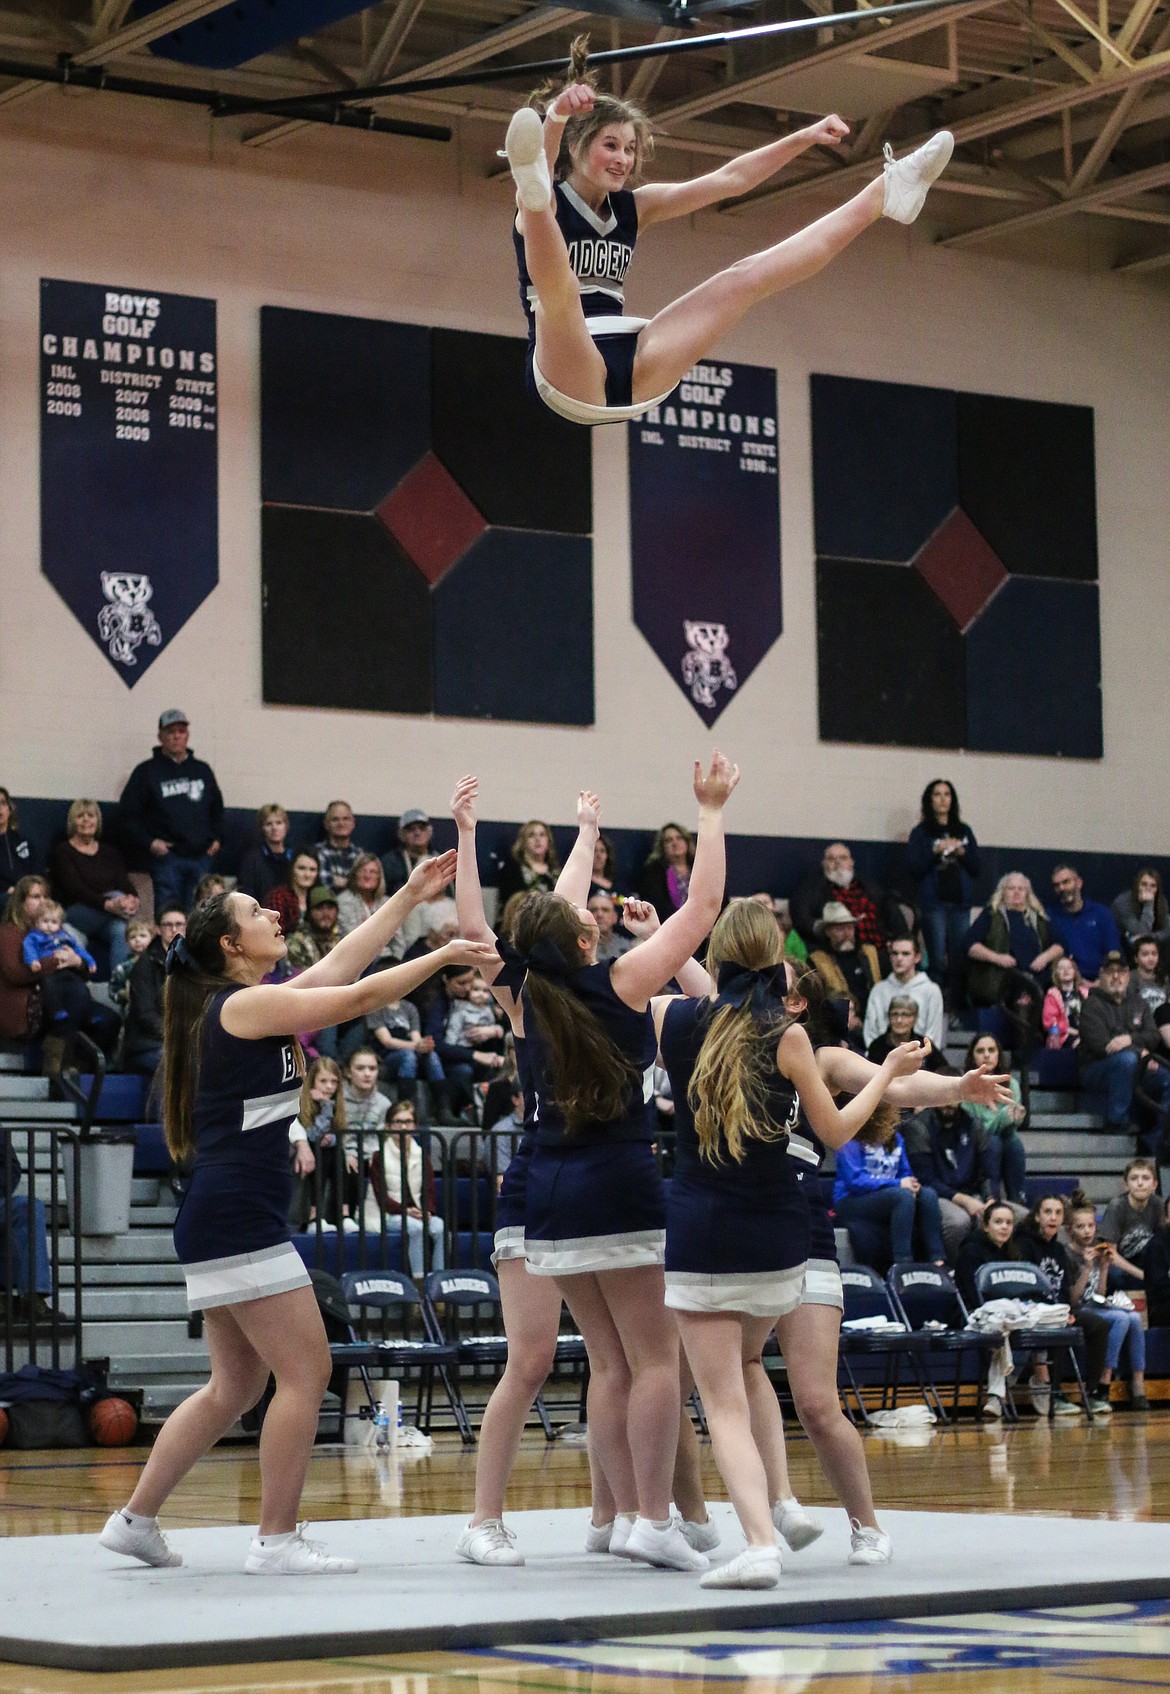 The Badger cheer-leaders thrill the crowd at a recent home game.